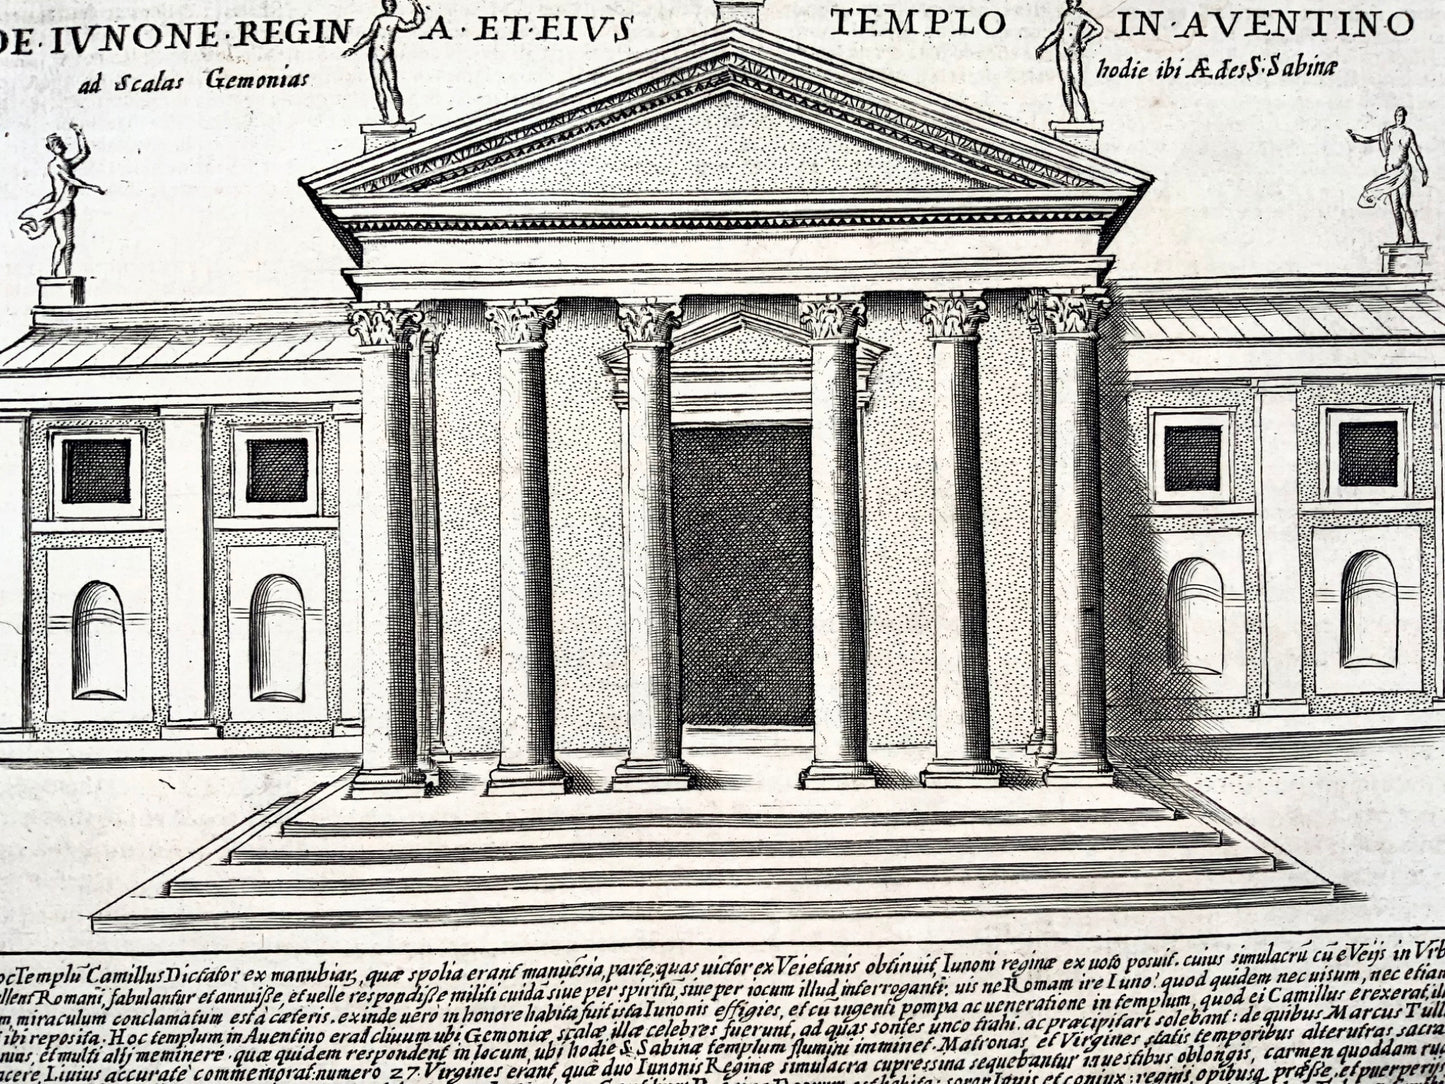 1624 G. Laurus, Temple of Juno on the Aventine, Rome, Italy, copper engraving